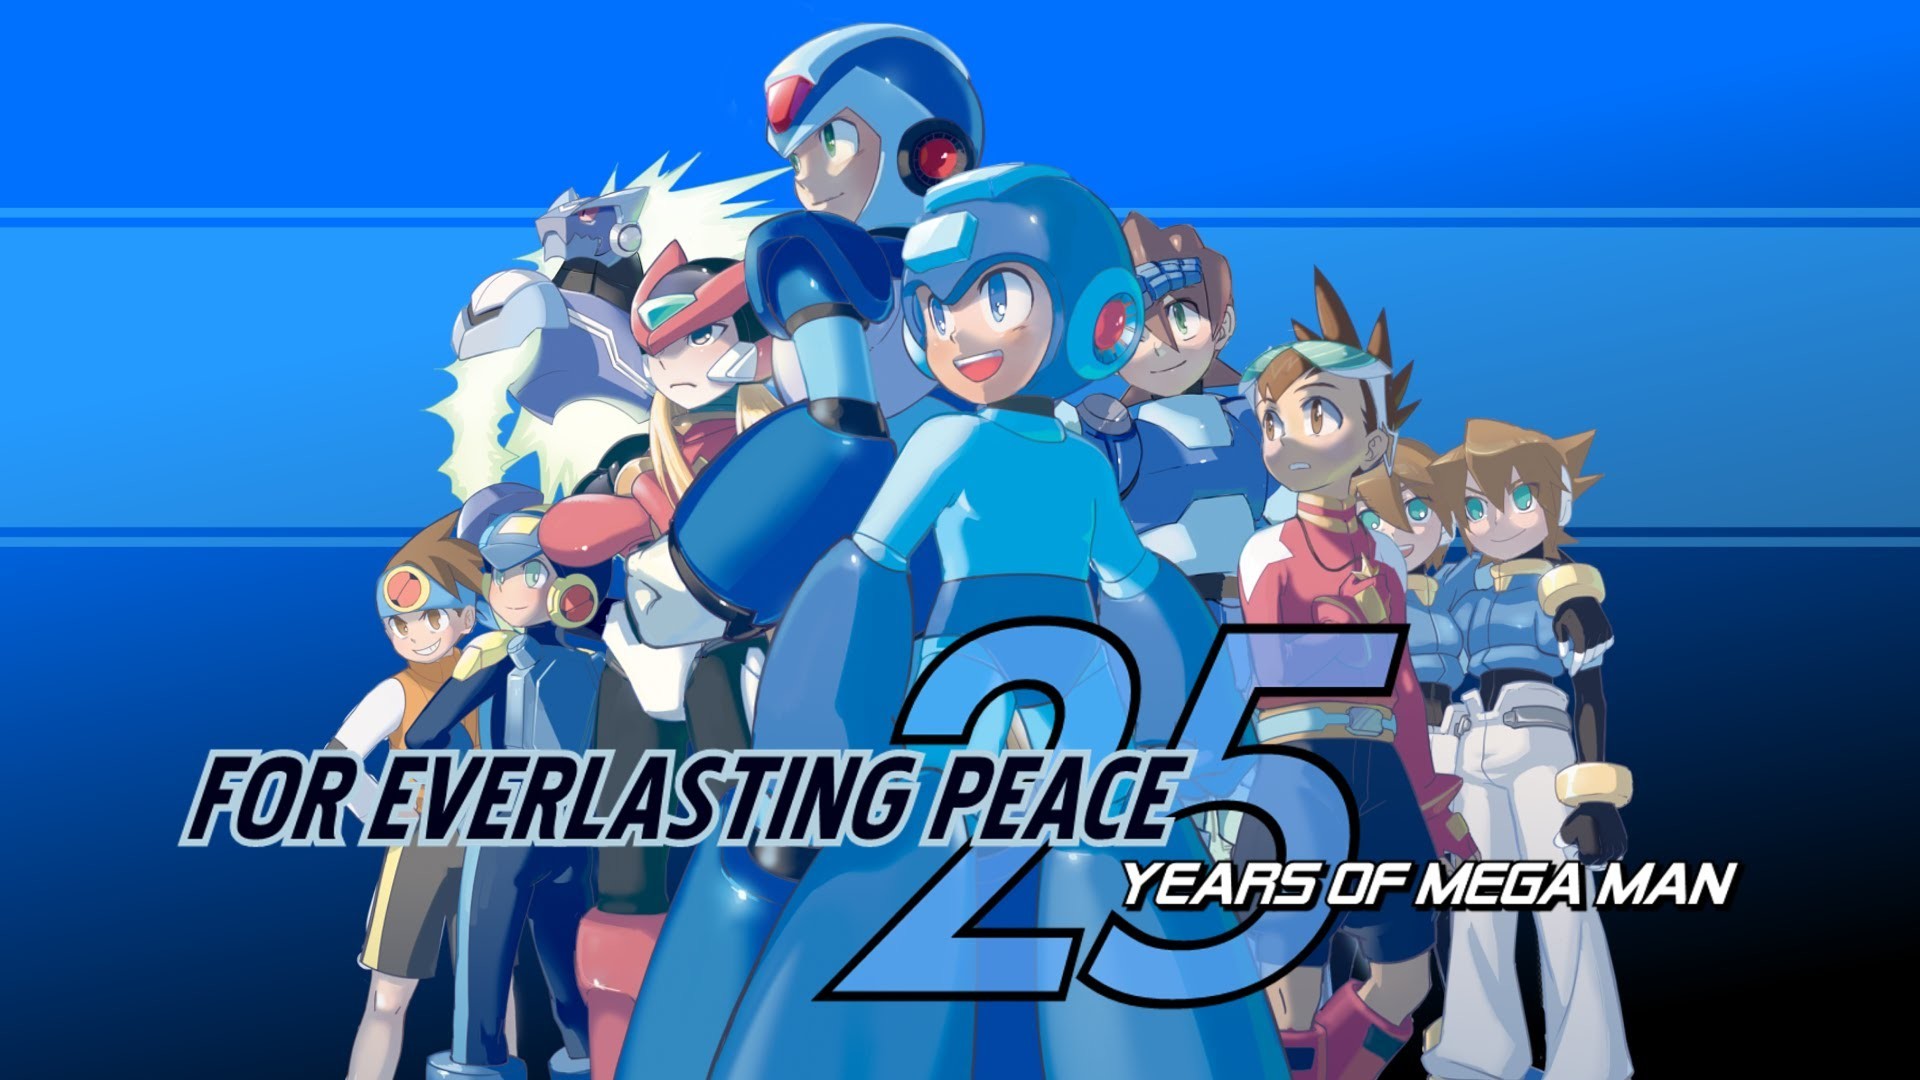 1920x1080 For Everlasting Peace: 25 Years of Mega Man, An OC ReMix Album - YouTube